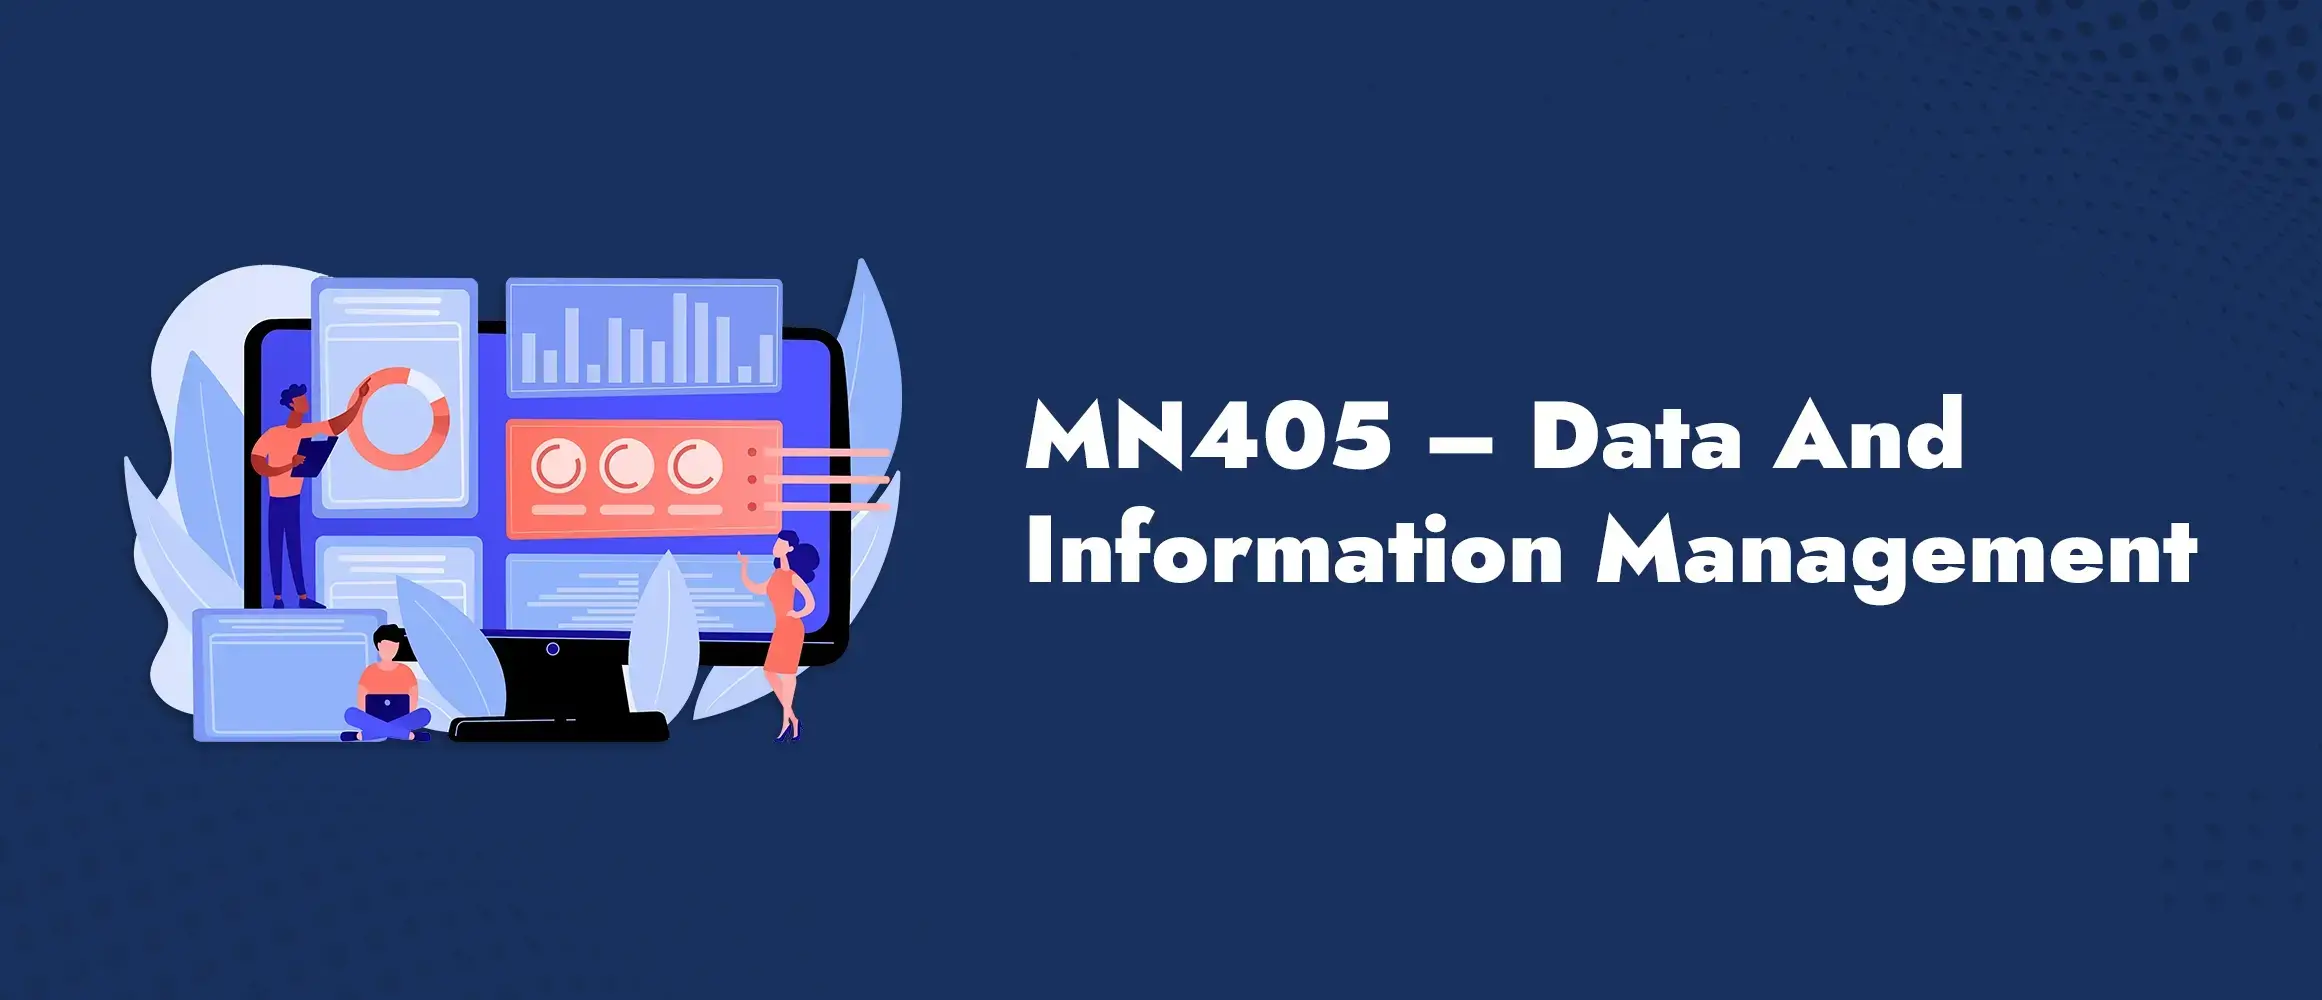 MN405 Data And Information Management